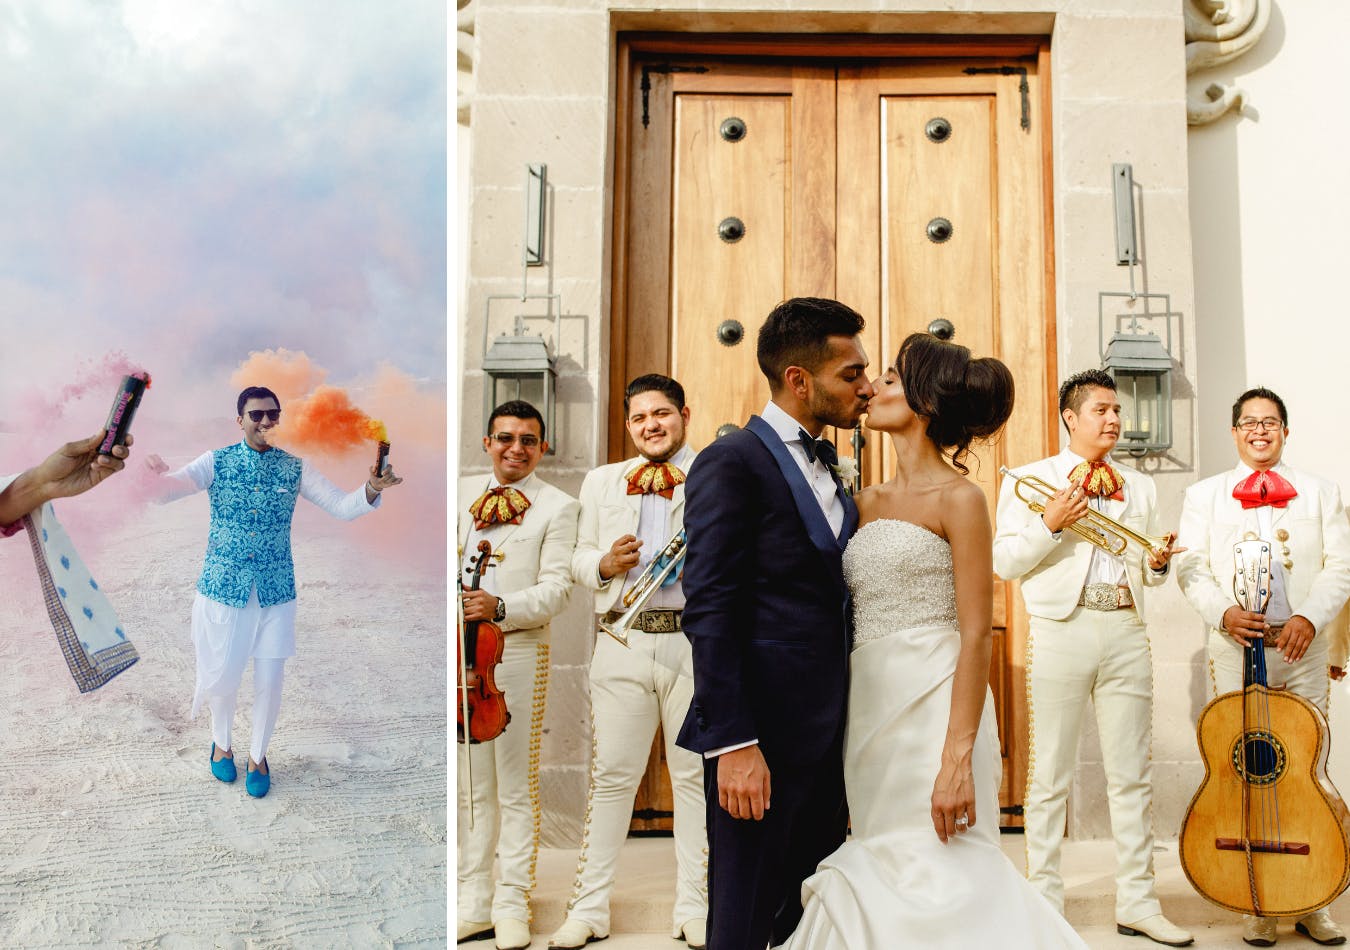 Latin-Indian wedding with colorful smoke bombs and mariachi band | PartySlate